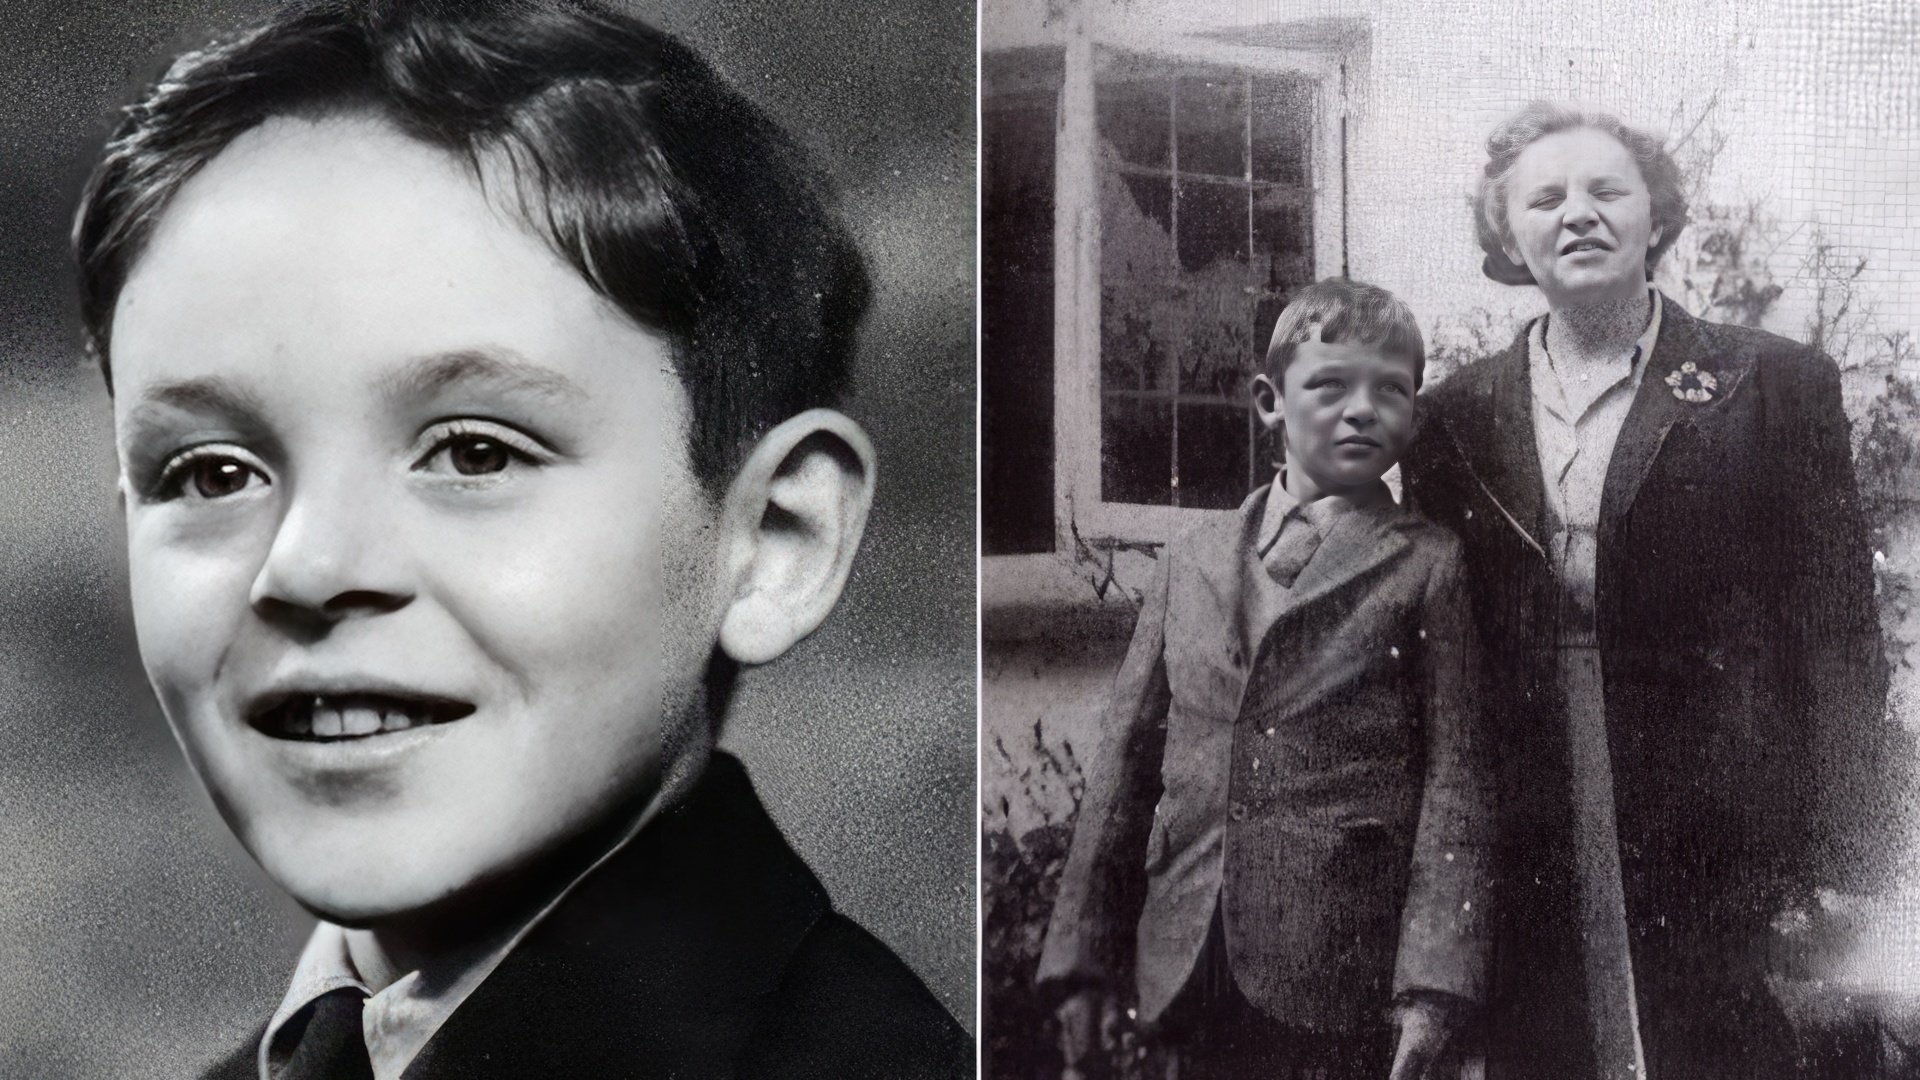 Anthony Hopkins in childhood (from the right in the photo with his mother)